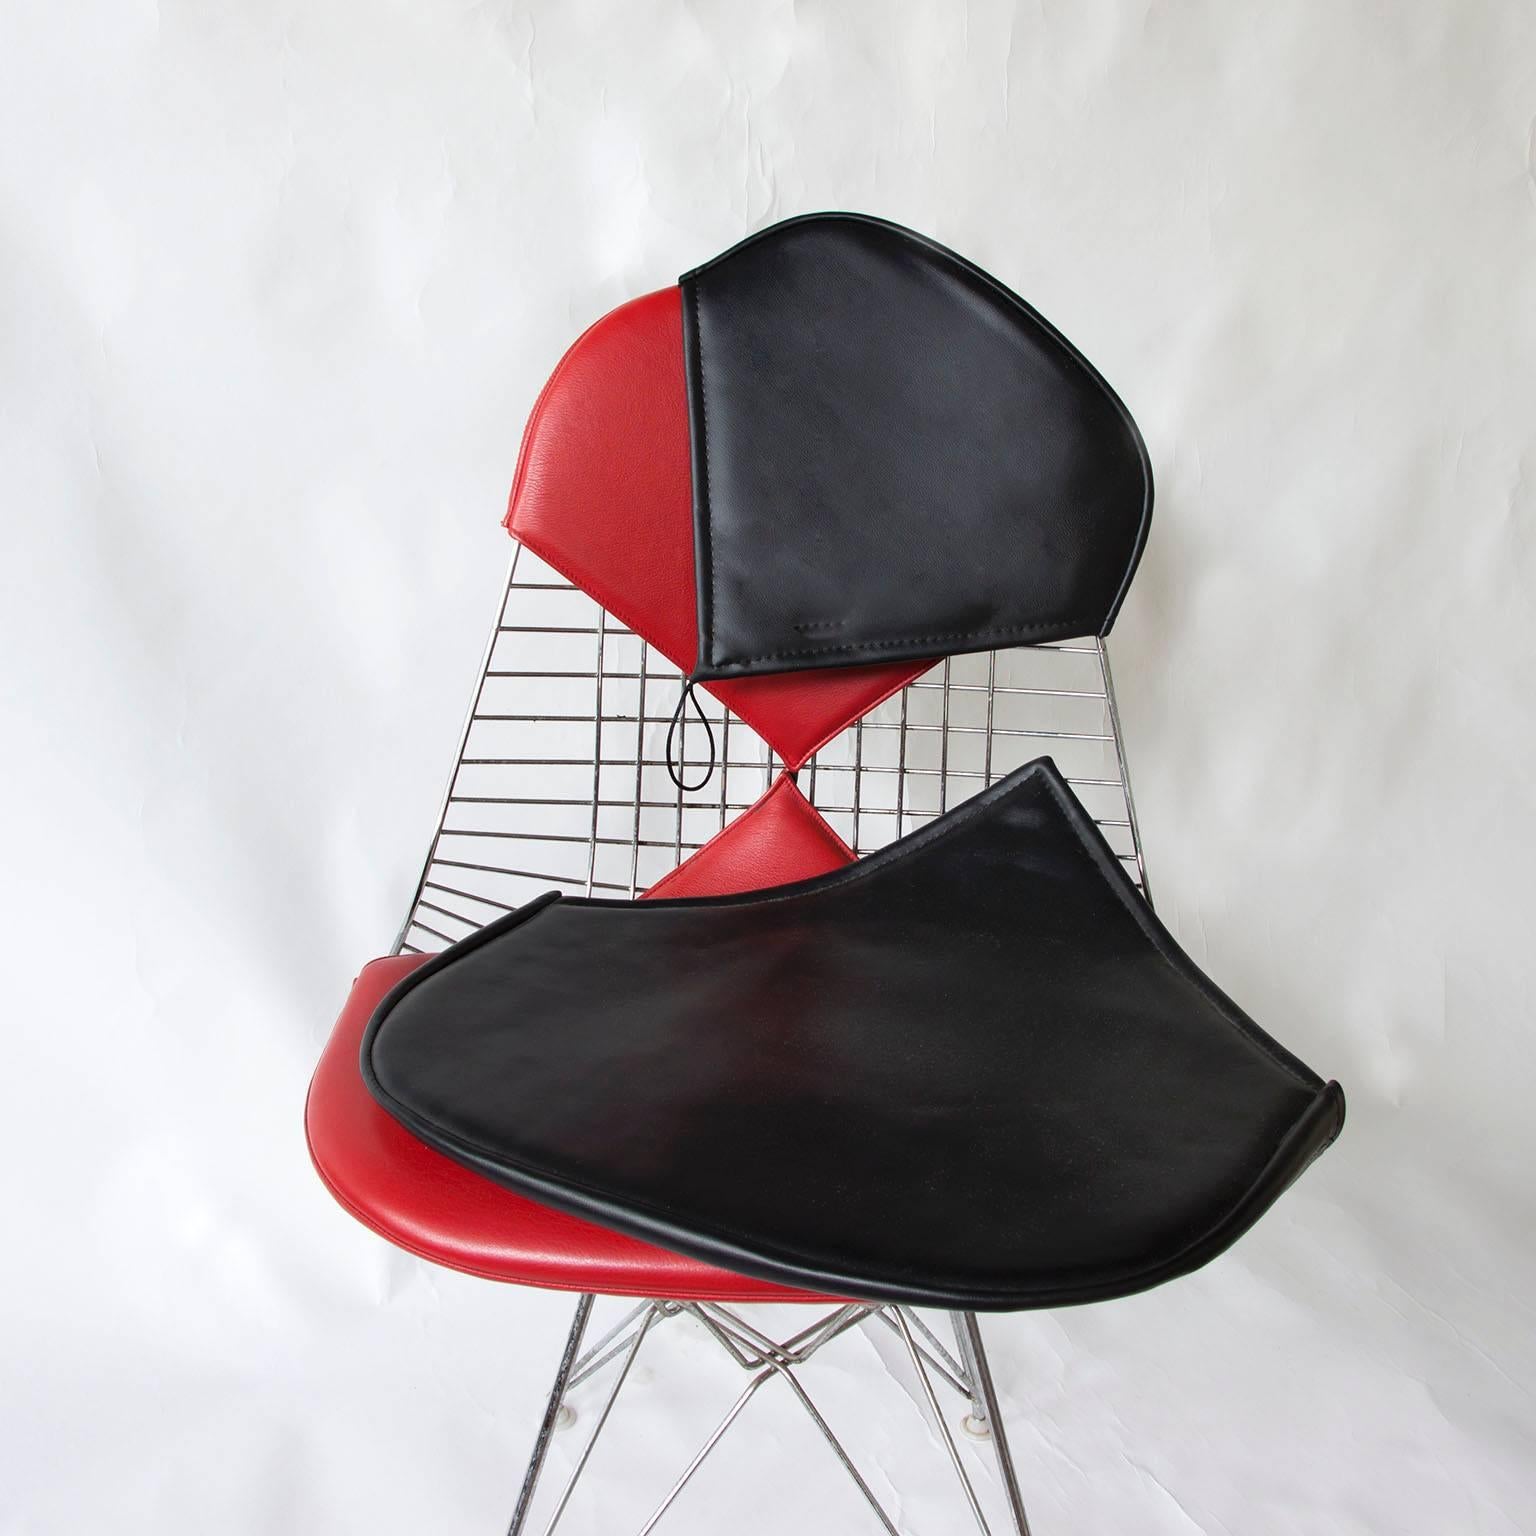 1950, Charles and Ray Eames, Set of Four DKR Chairs Red Leather Bikinis For Sale 3